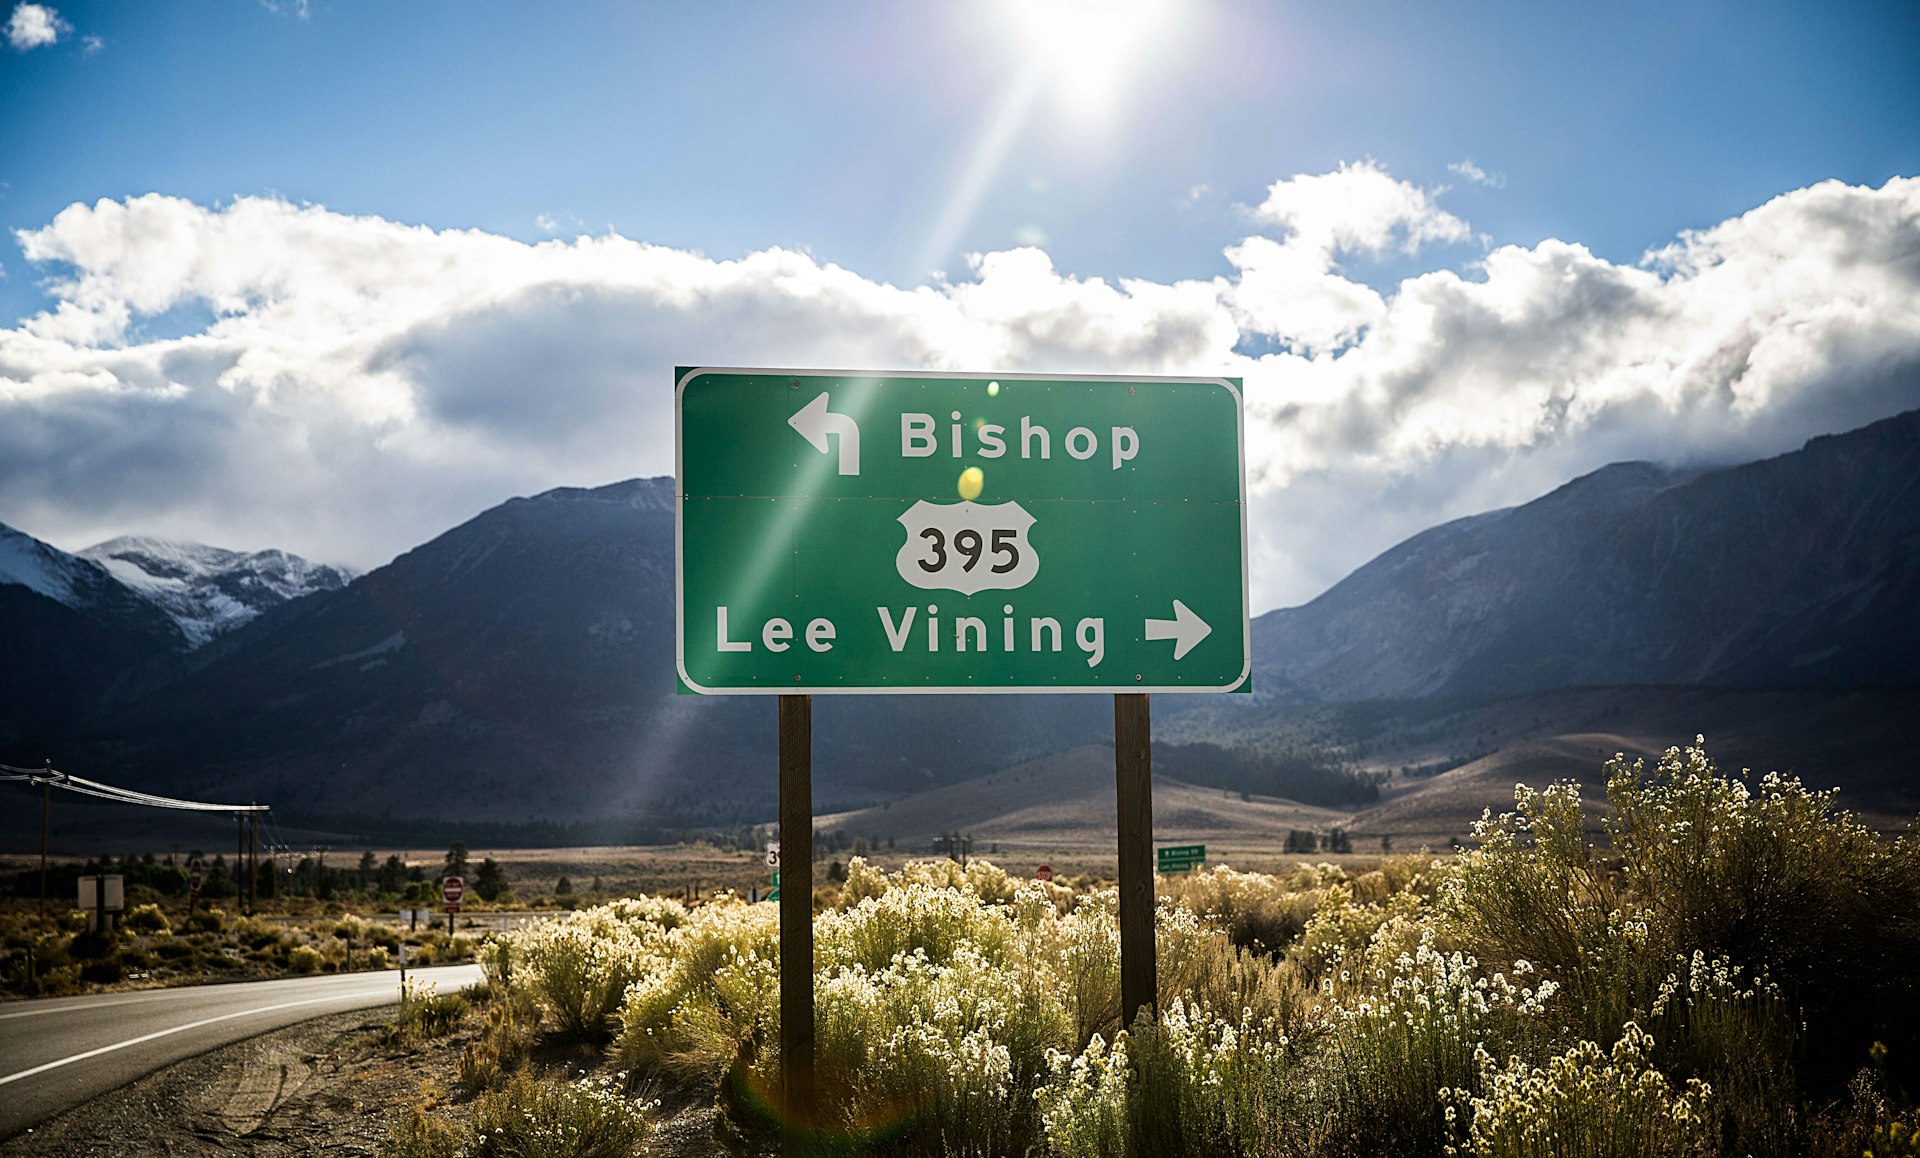 The sun shines behind a green road sign designating Hwy 395 in California and pointing to Bishop to the left and Lee Vining to the right.